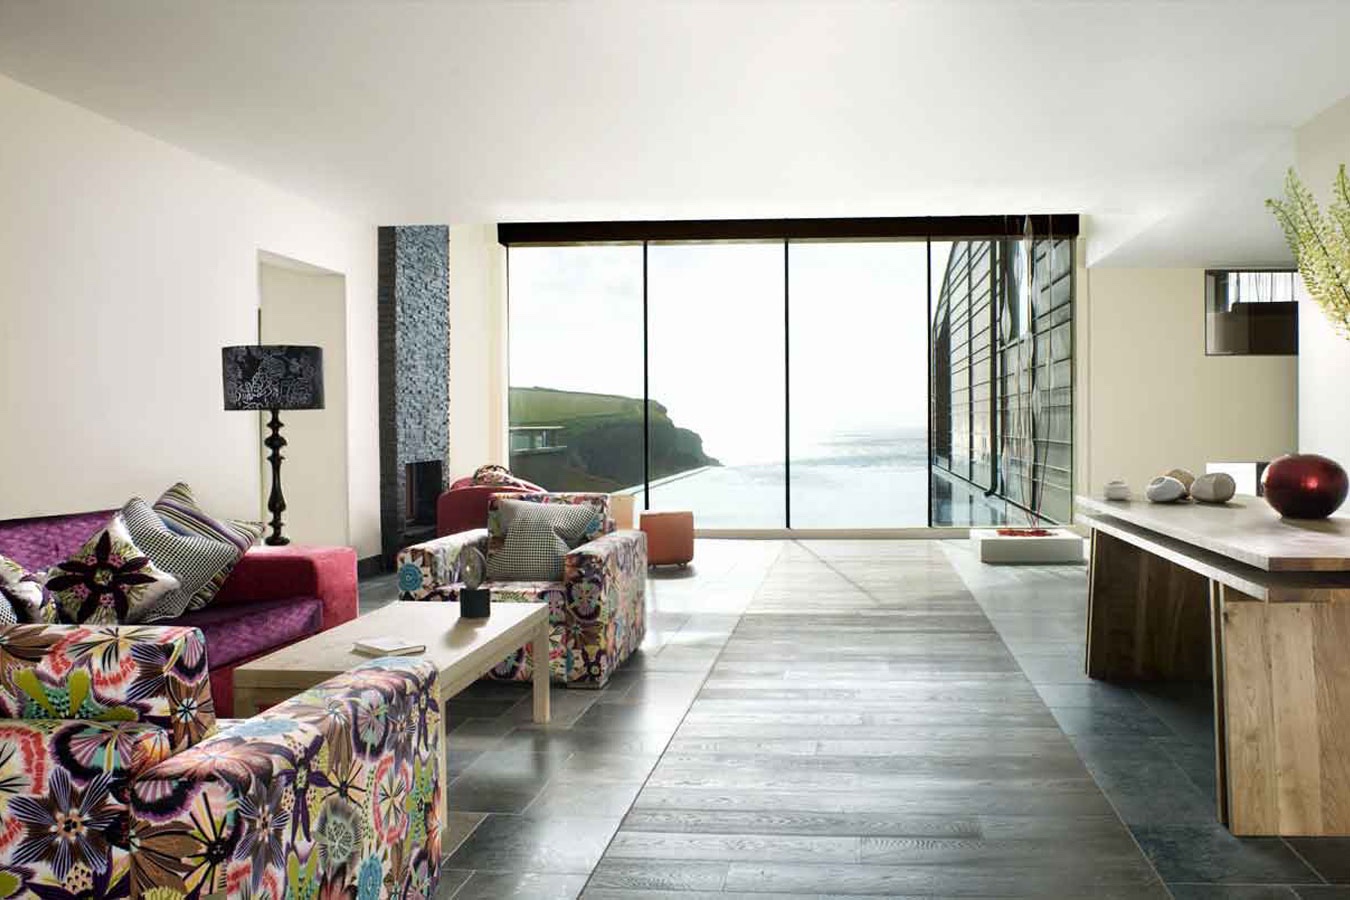 Review - The Scarlet Hotel & Spa - We Fall in Love With Cornwall’s Eco Retreat